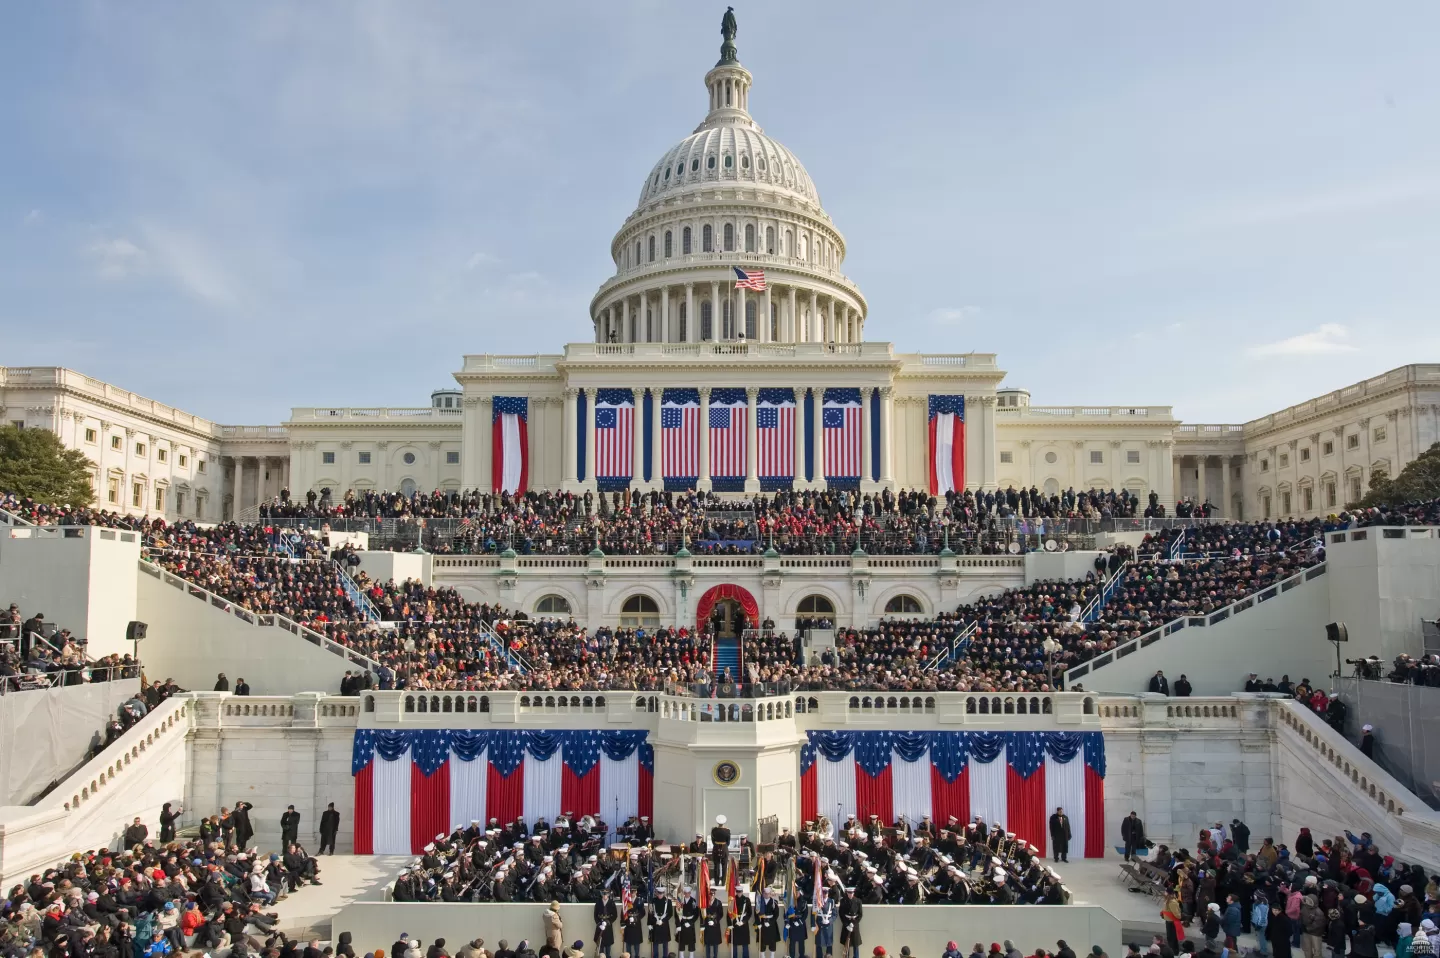 Inauguration at the . Capitol | Architect of the Capitol